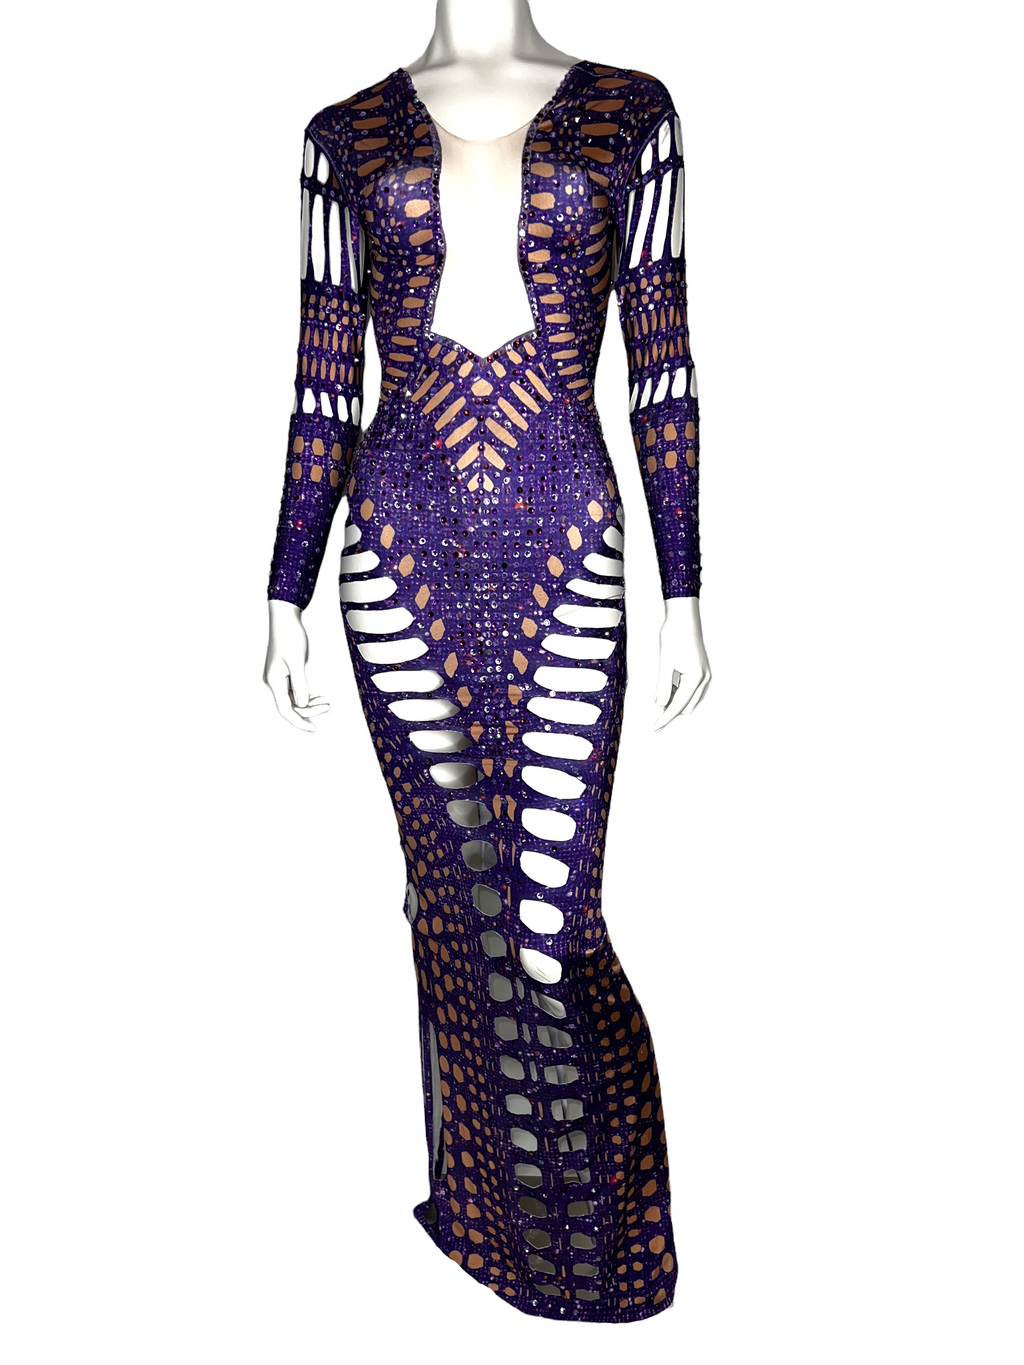 "Royal Pearlesque Crystal Cut Out Dress"